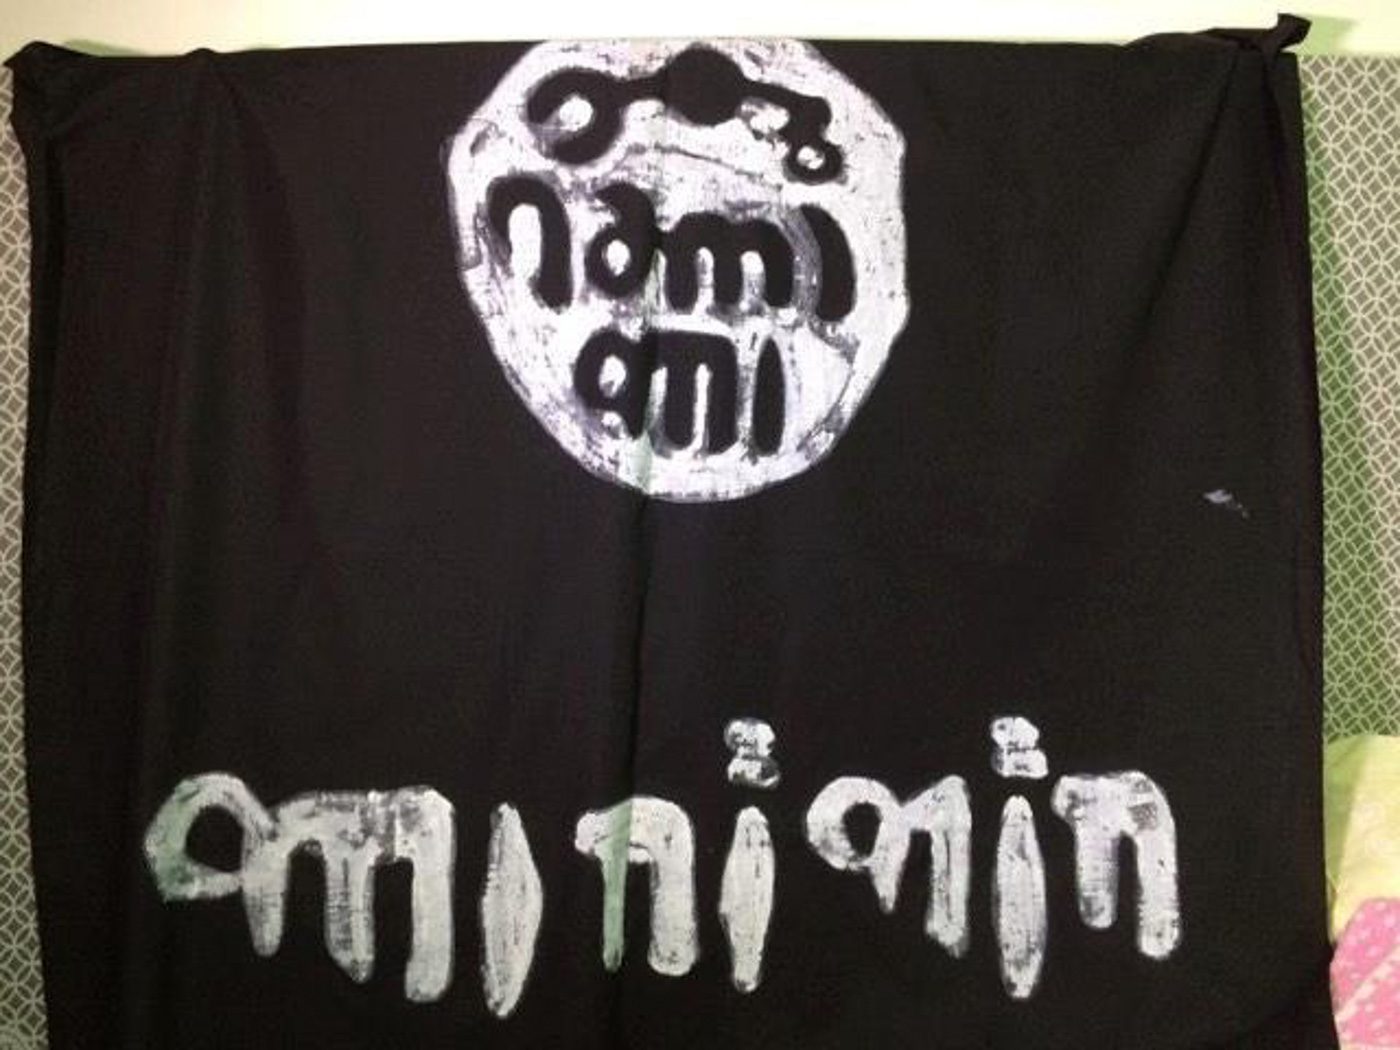 ISIS FLAG? PDEA in Region XII says they recovered a black flag that appeared to be a symbol of the Islamic State in Iraq and Syria during a November 1 raid in Maasim, Sarangani Province. Photo courtesy of PDEA Region XII 